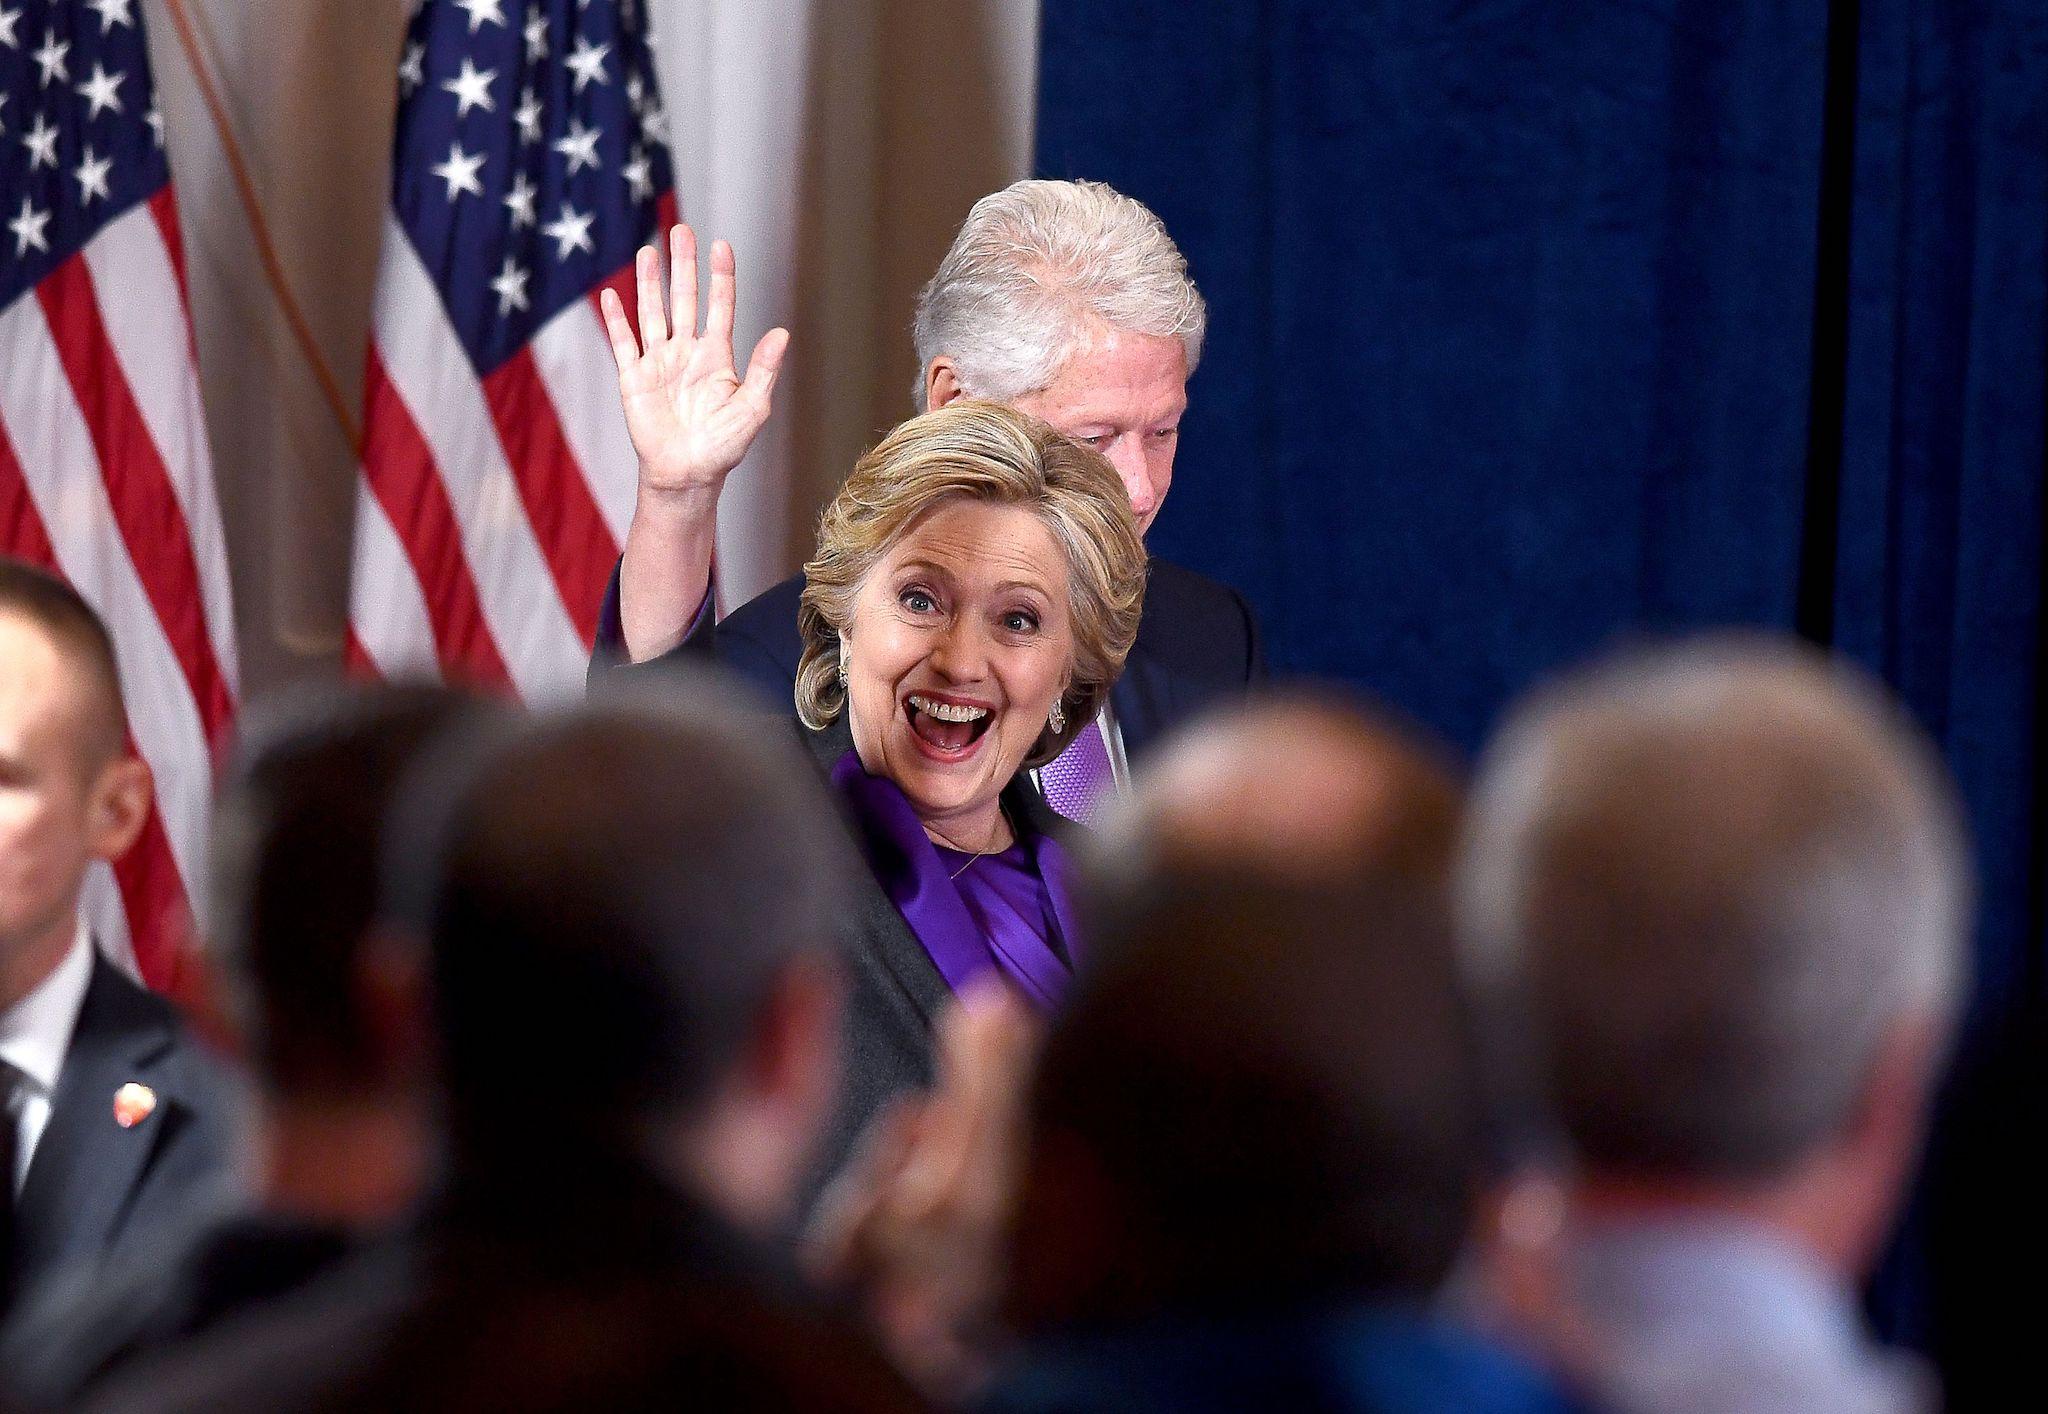 US Democratic presidential candidate Hillary Clinton is accompanied by her husband and former president Bill Clinton as she arrives to make a concession speech after being defeated by Republican president-elect Donald Trump, in New York on November 9, 201